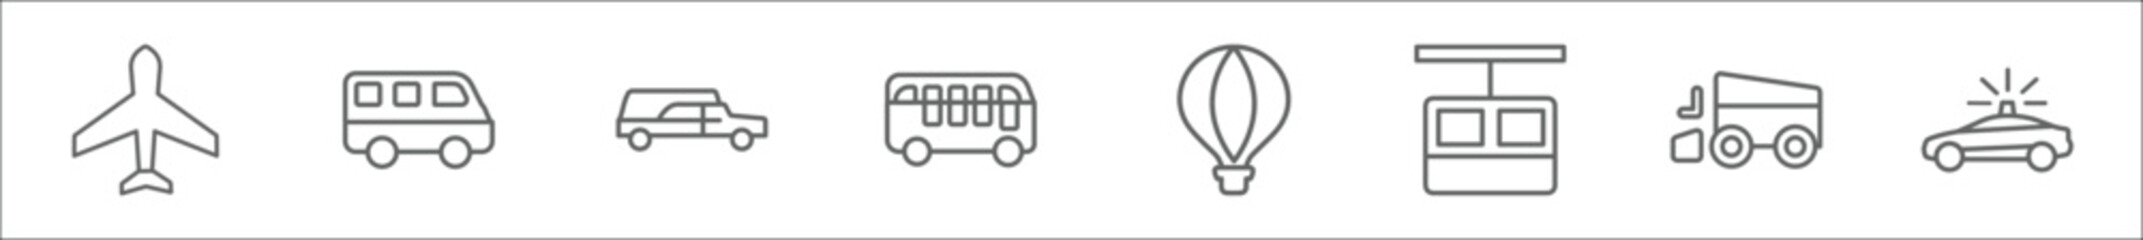 outline set of transportation line icons. linear vector icons such as aeroplane, van, hearse, double decker bus, hot air balloon, chairlift, , patrol car